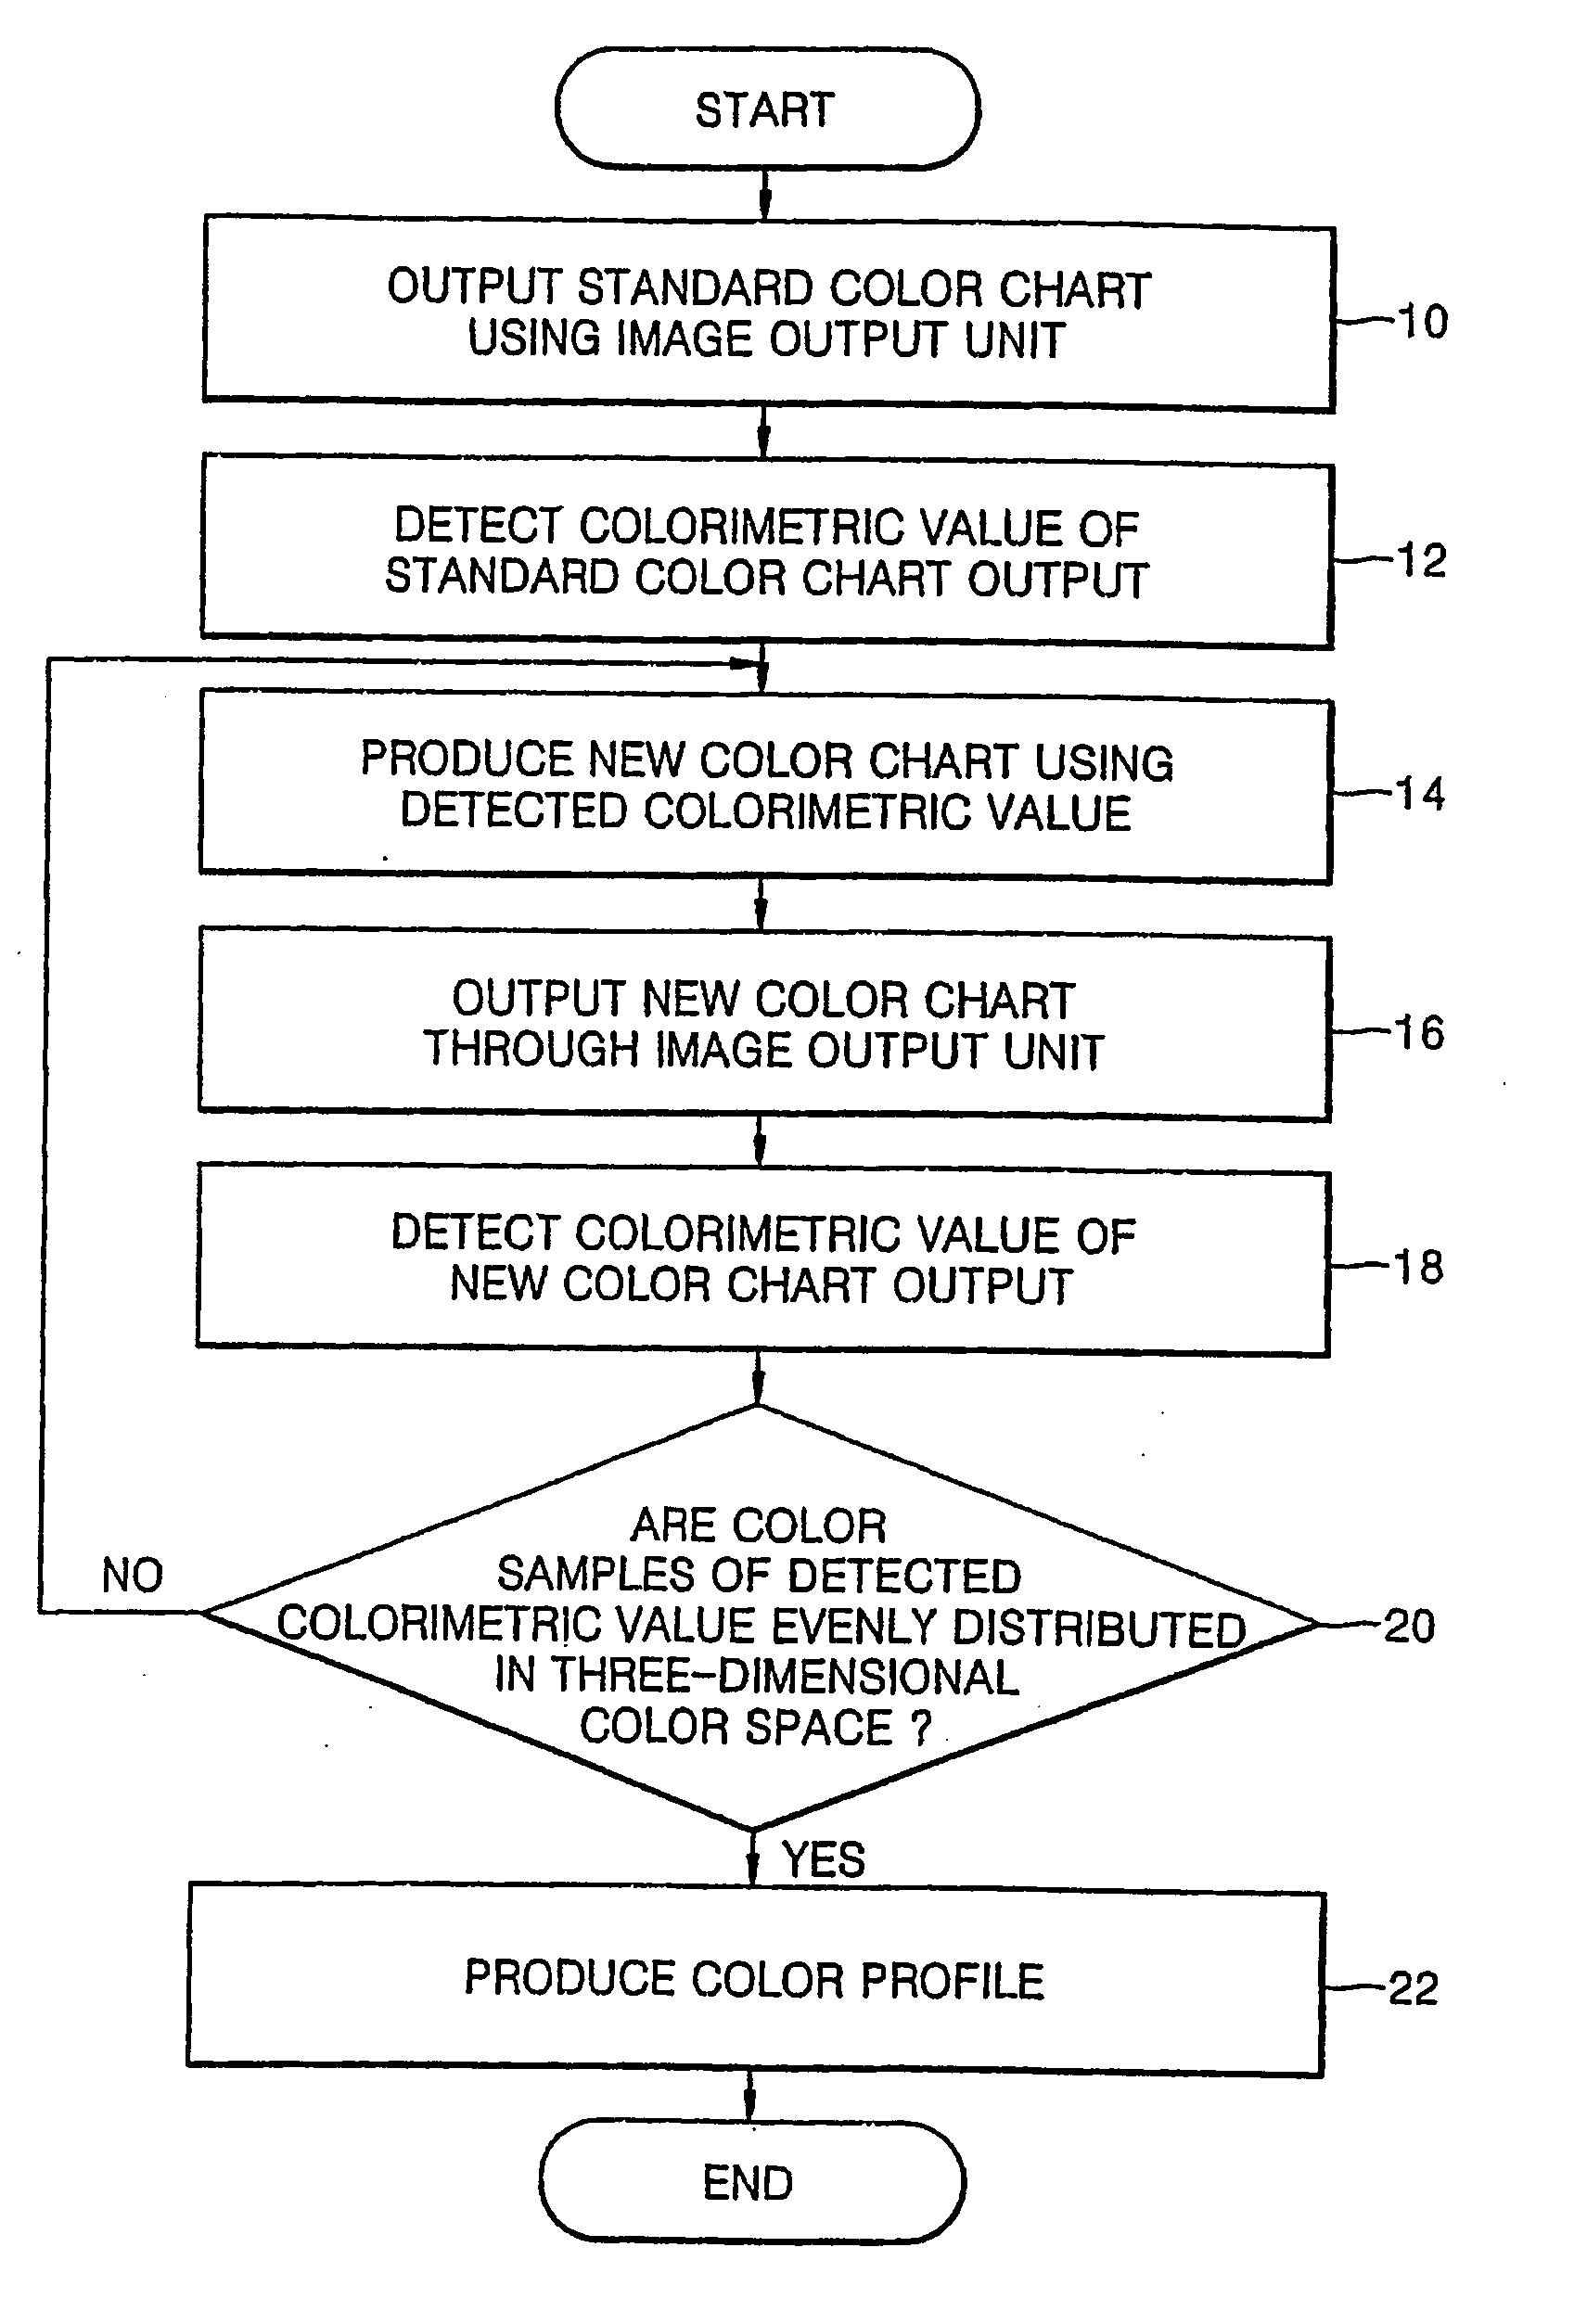 Method and apparatus for producing new color chart